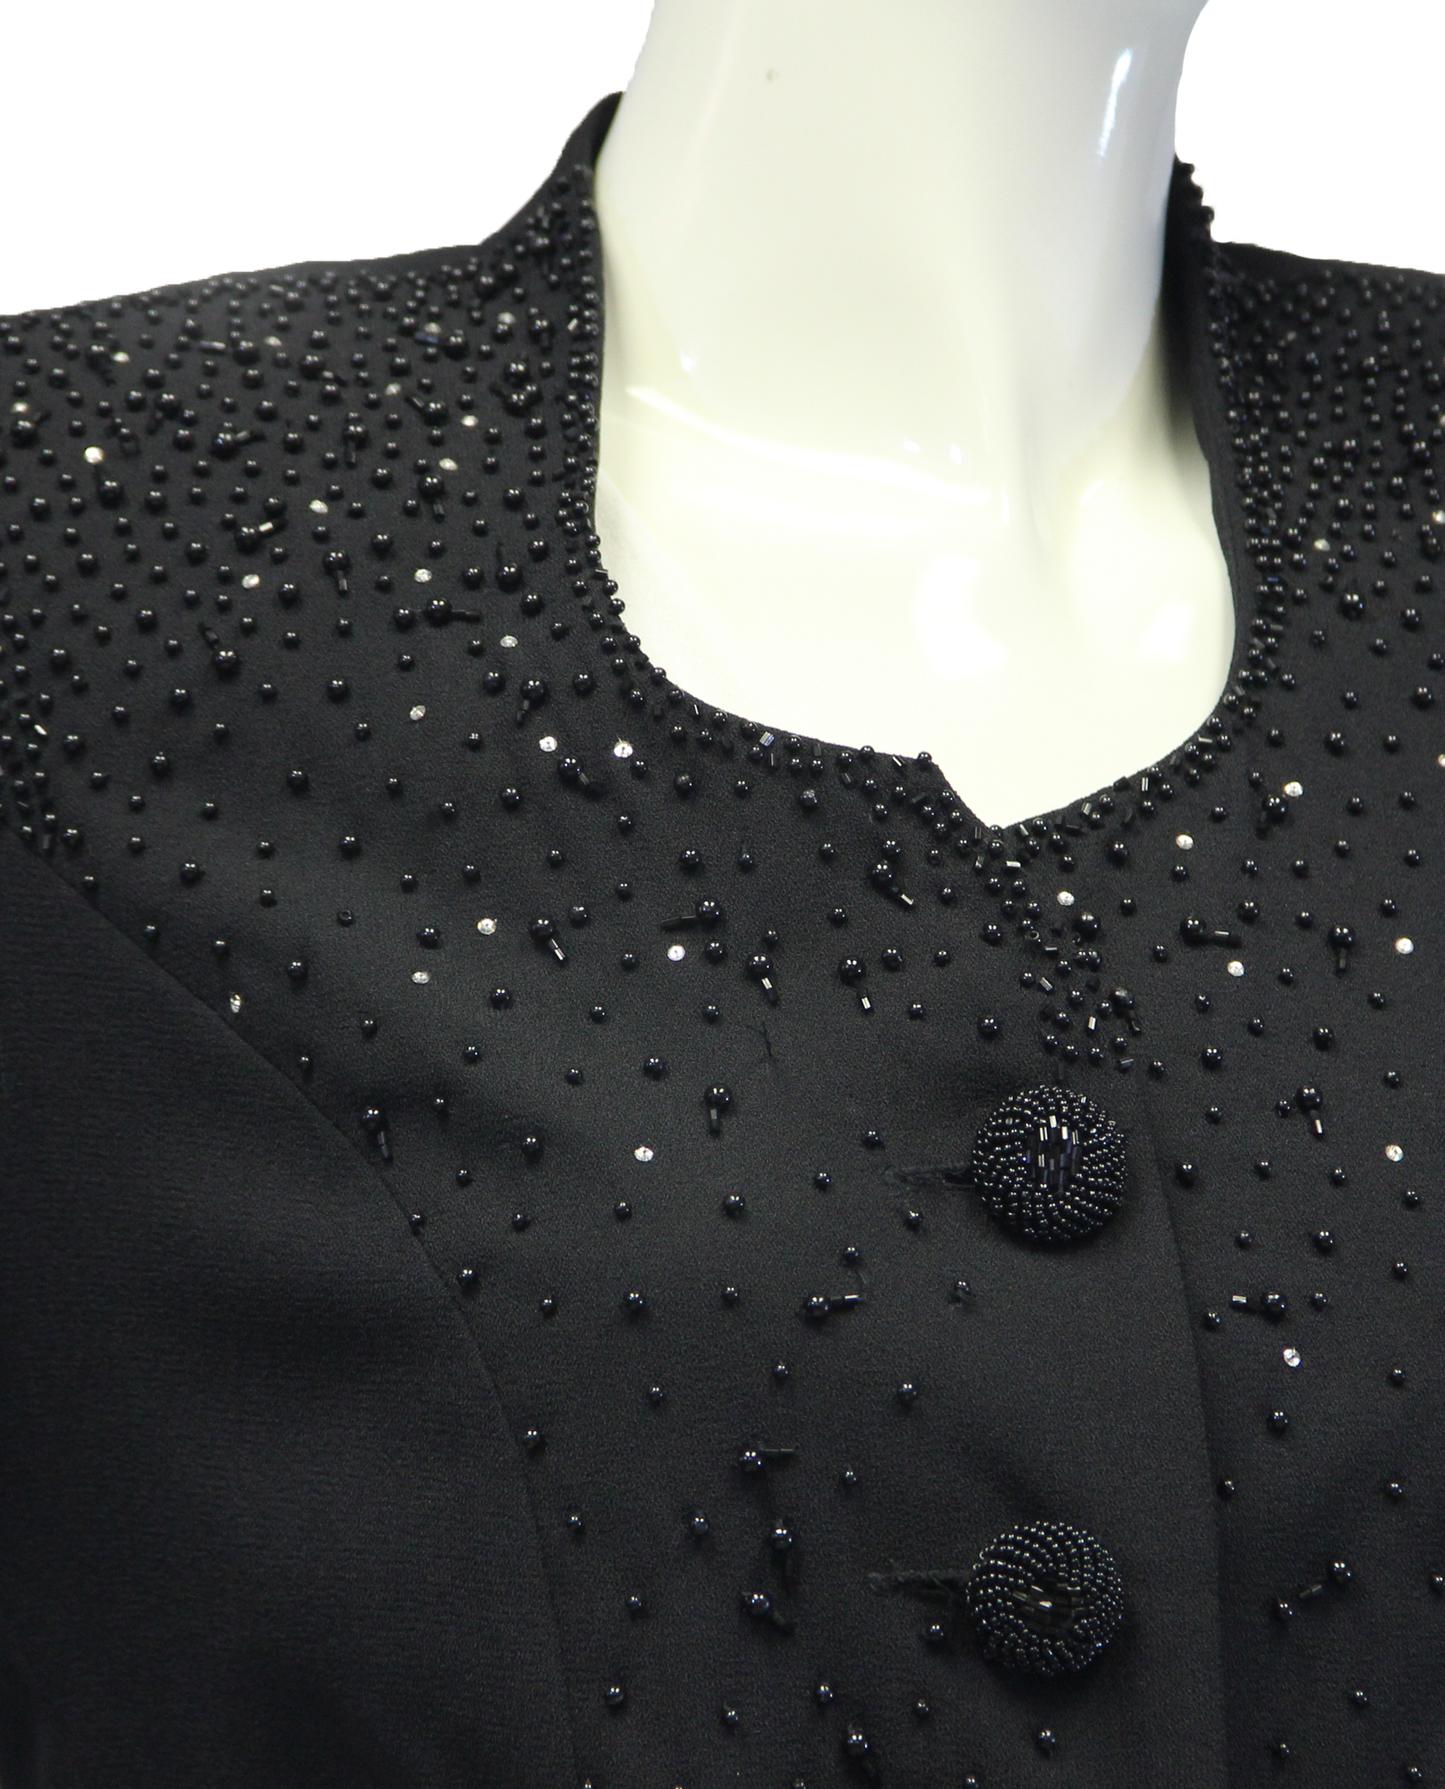 Load image into Gallery viewer, Black Pearls Embellished Blazer Size 8 (SKU 000046) - Designers On A Dime - 3
